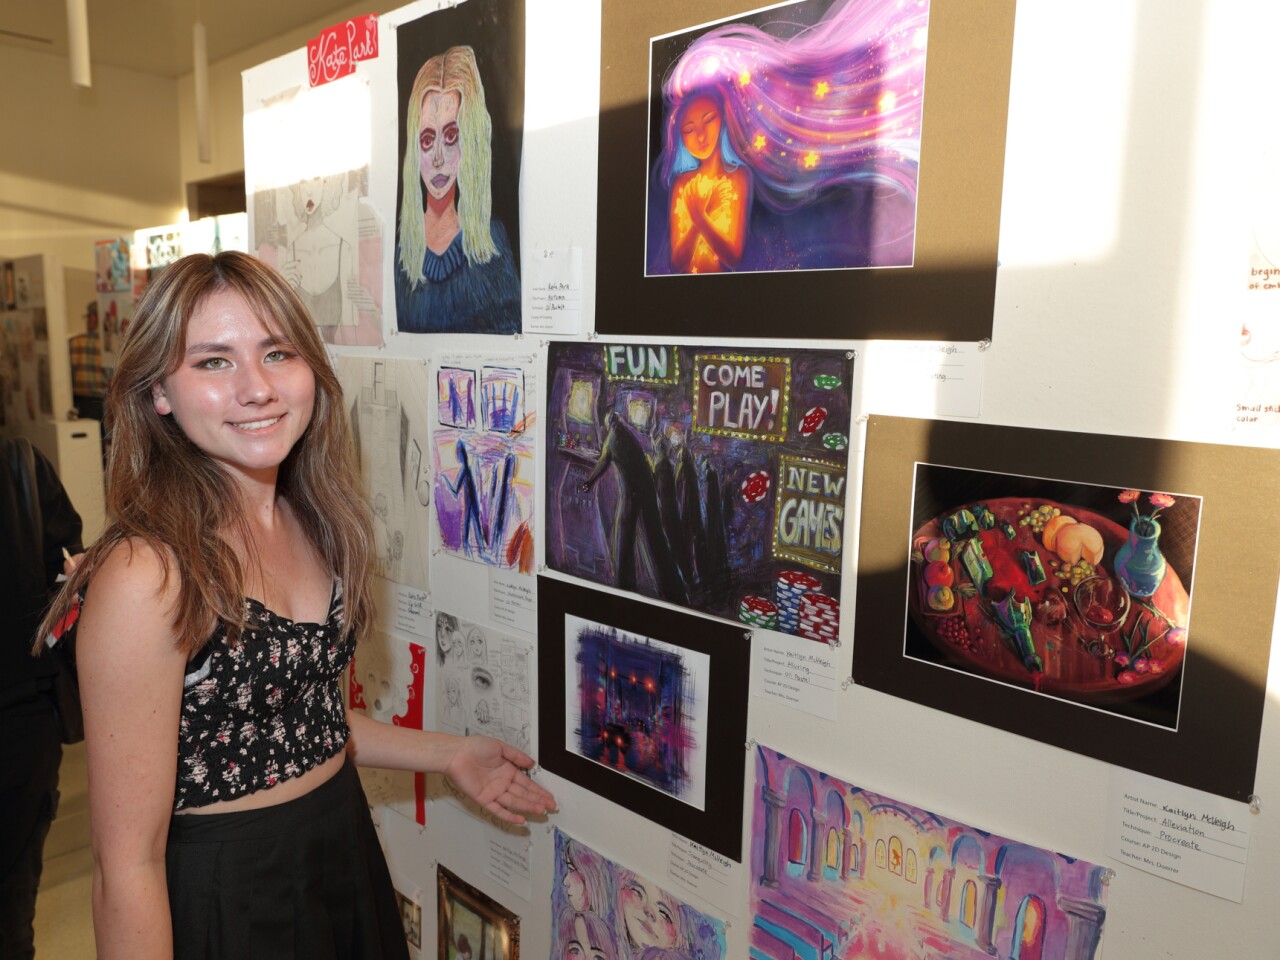 Kaitlyn McVeigh shares several of her AP 2D Design projects